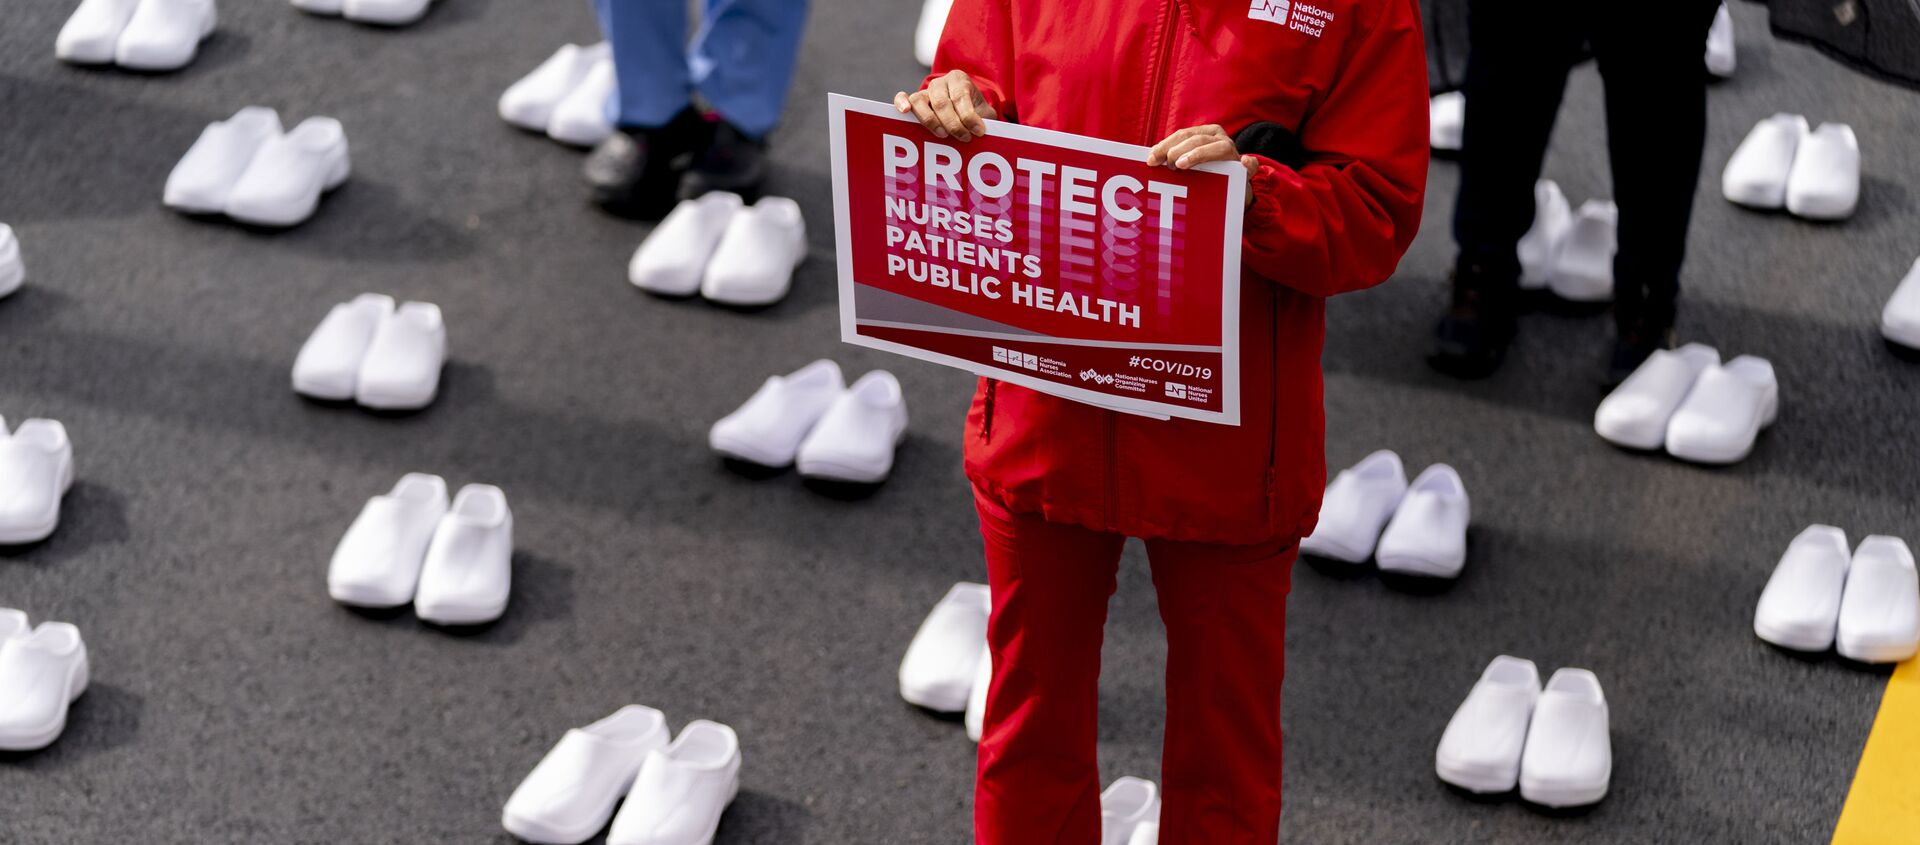 Nurses stand surrounded by white pairs of shoes to represent the 402 nurses who died because of covid-19, near the White House in Washington, Wednesday, May 12, 2021 - Sputnik International, 1920, 16.06.2021